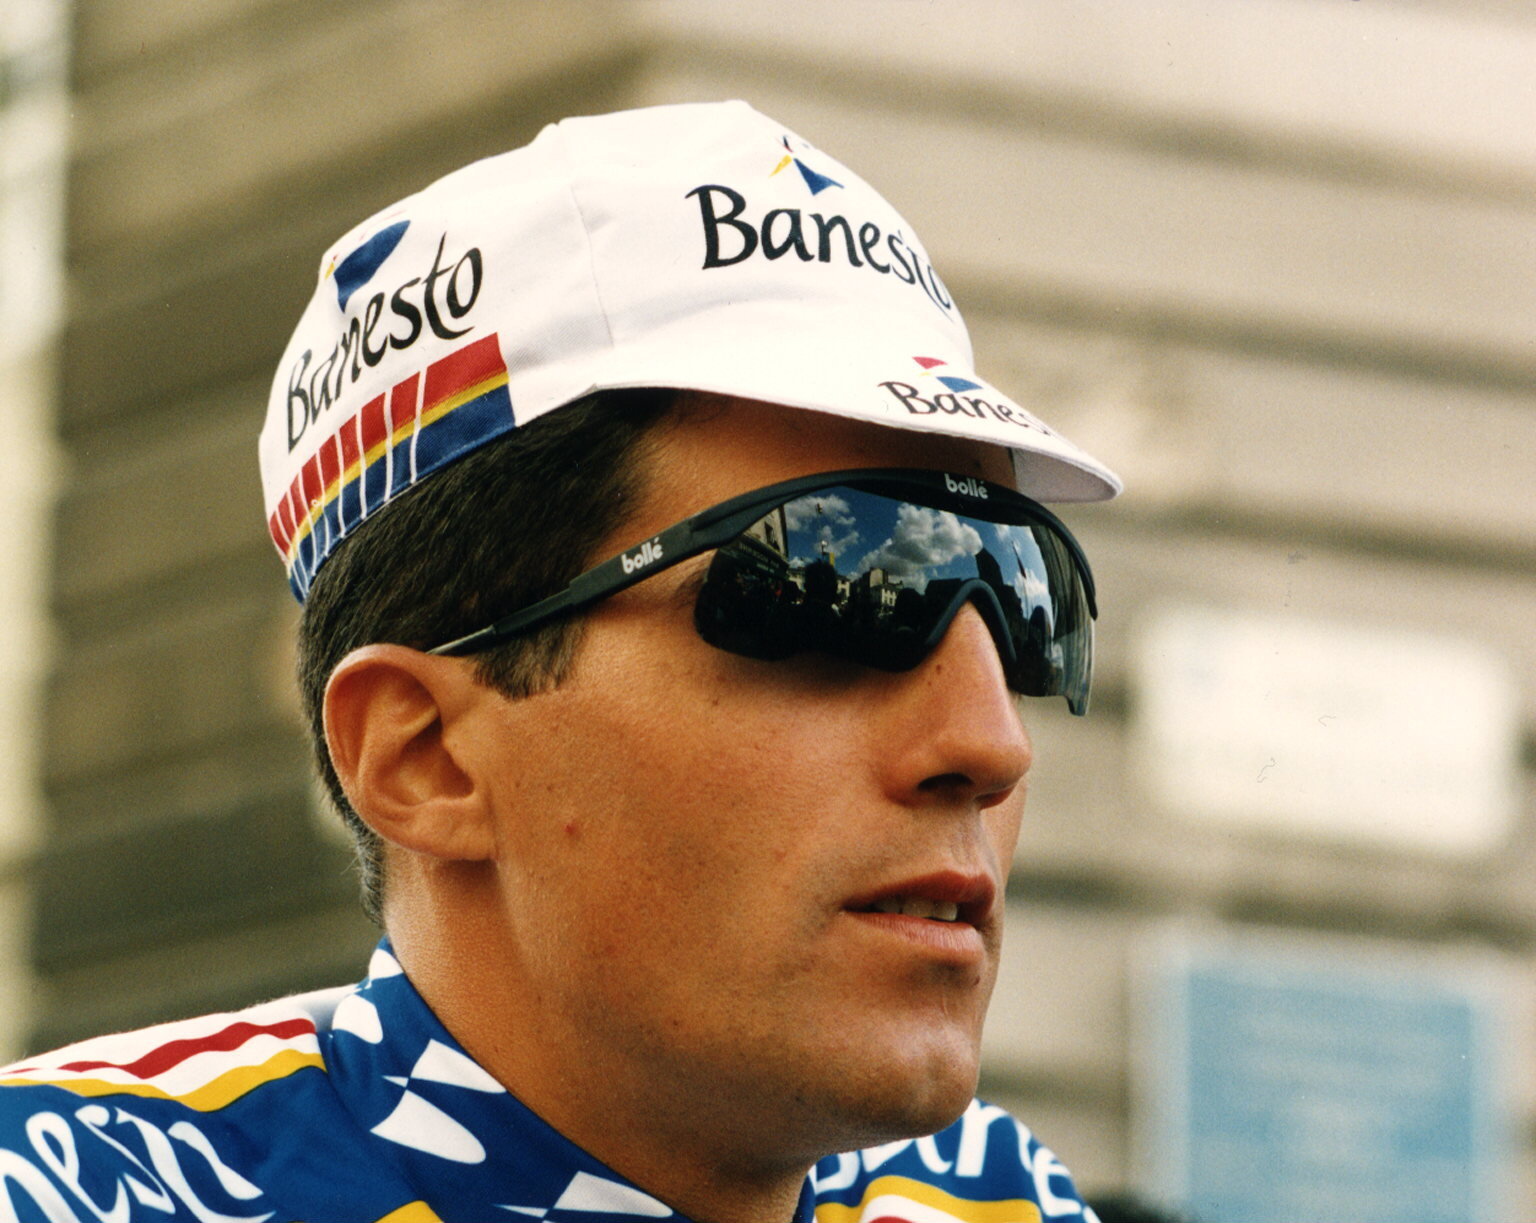 What happened to Miguel Indurain, five-time Tour de France winner?